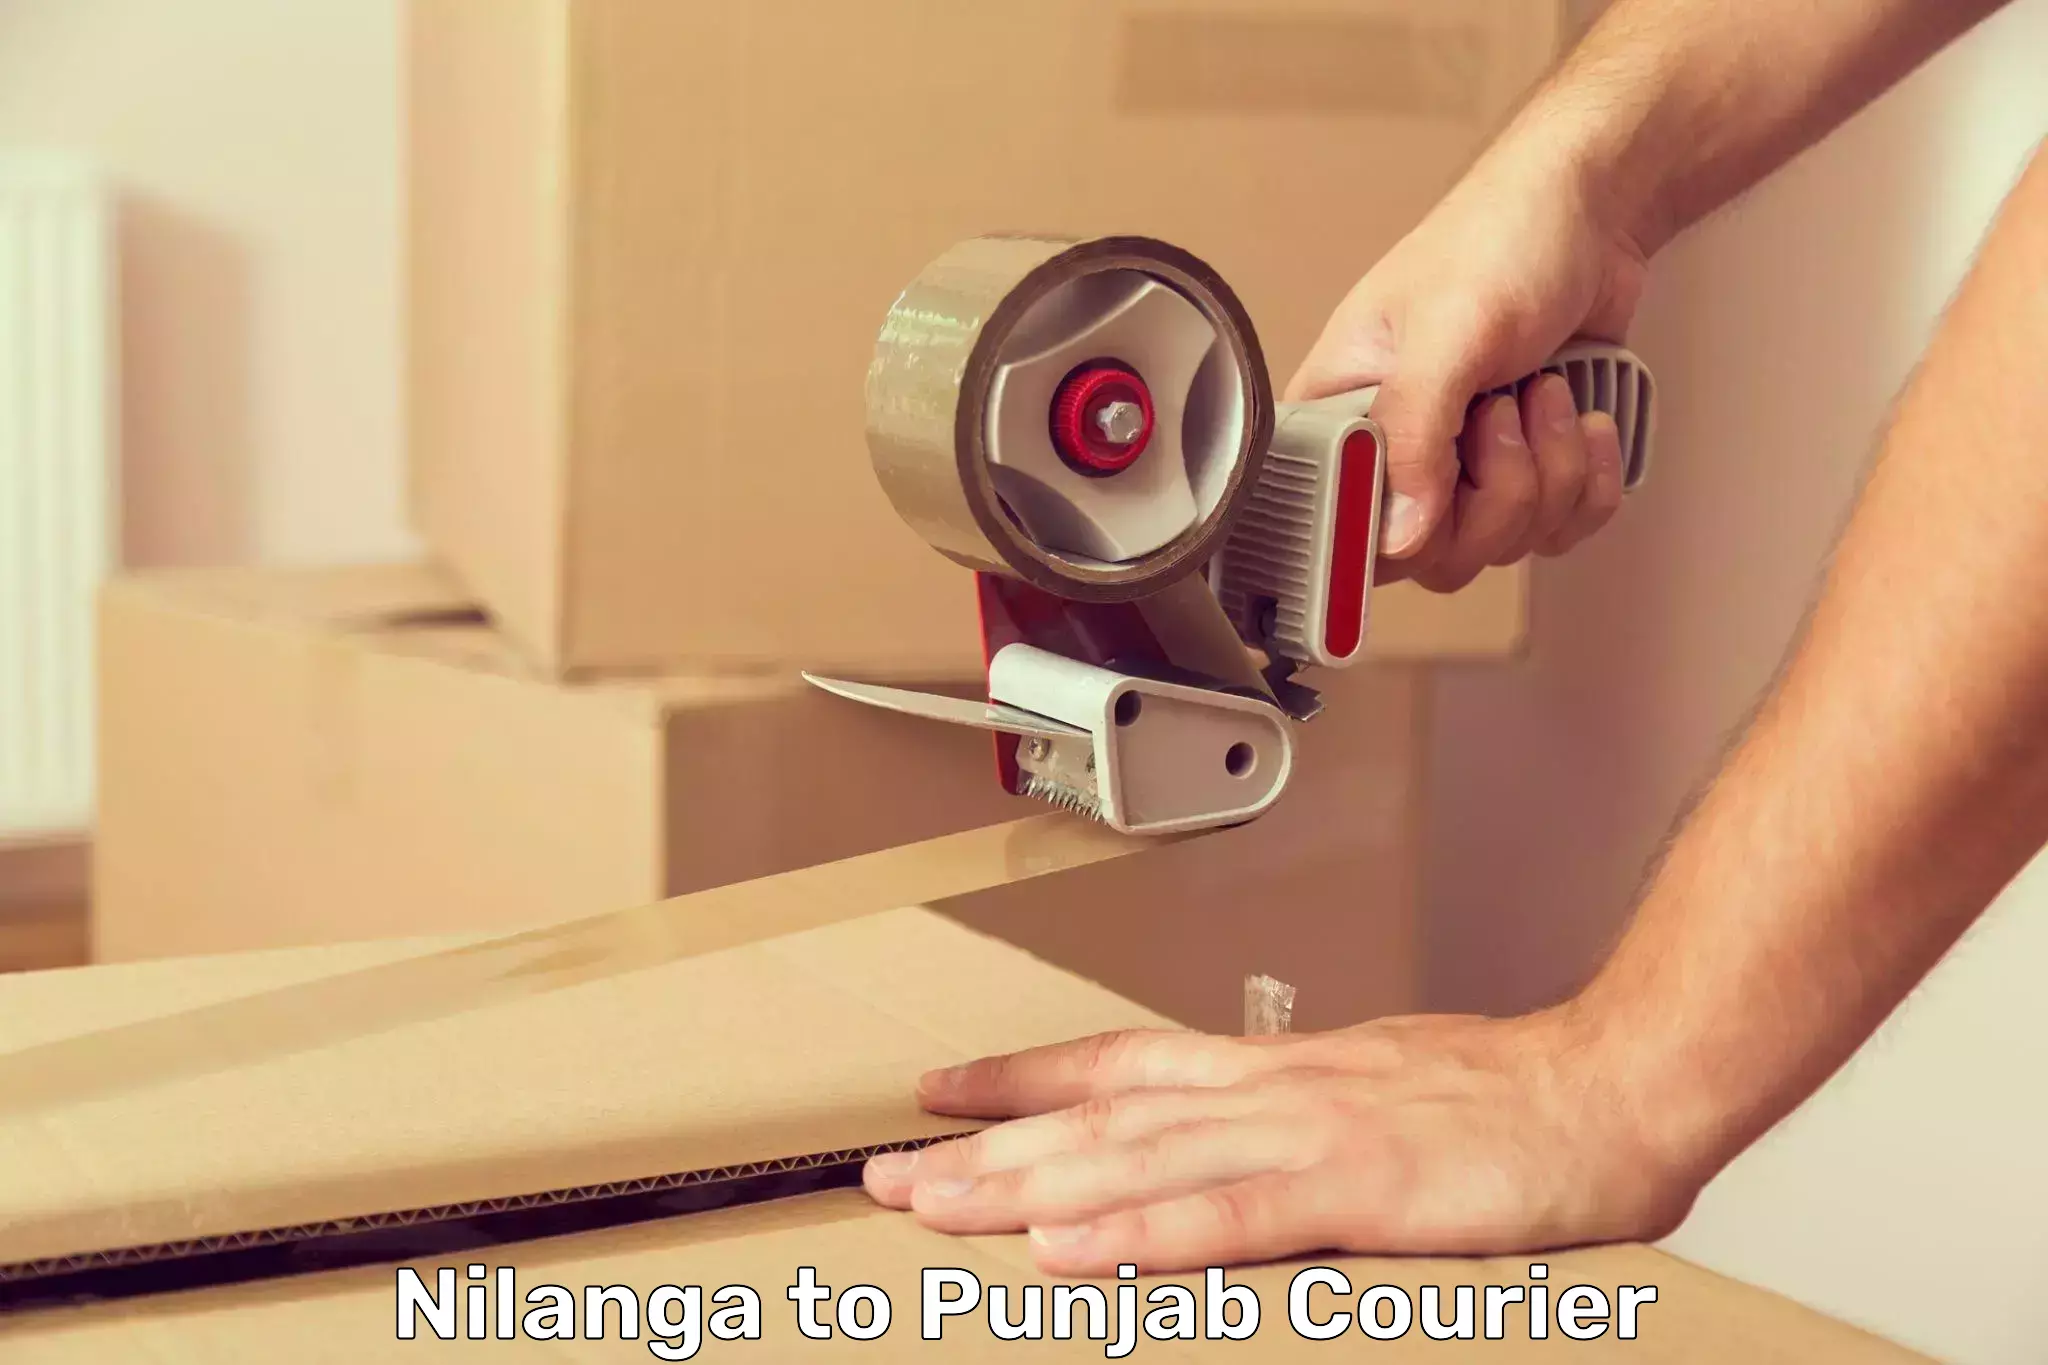 Express delivery network Nilanga to Patiala